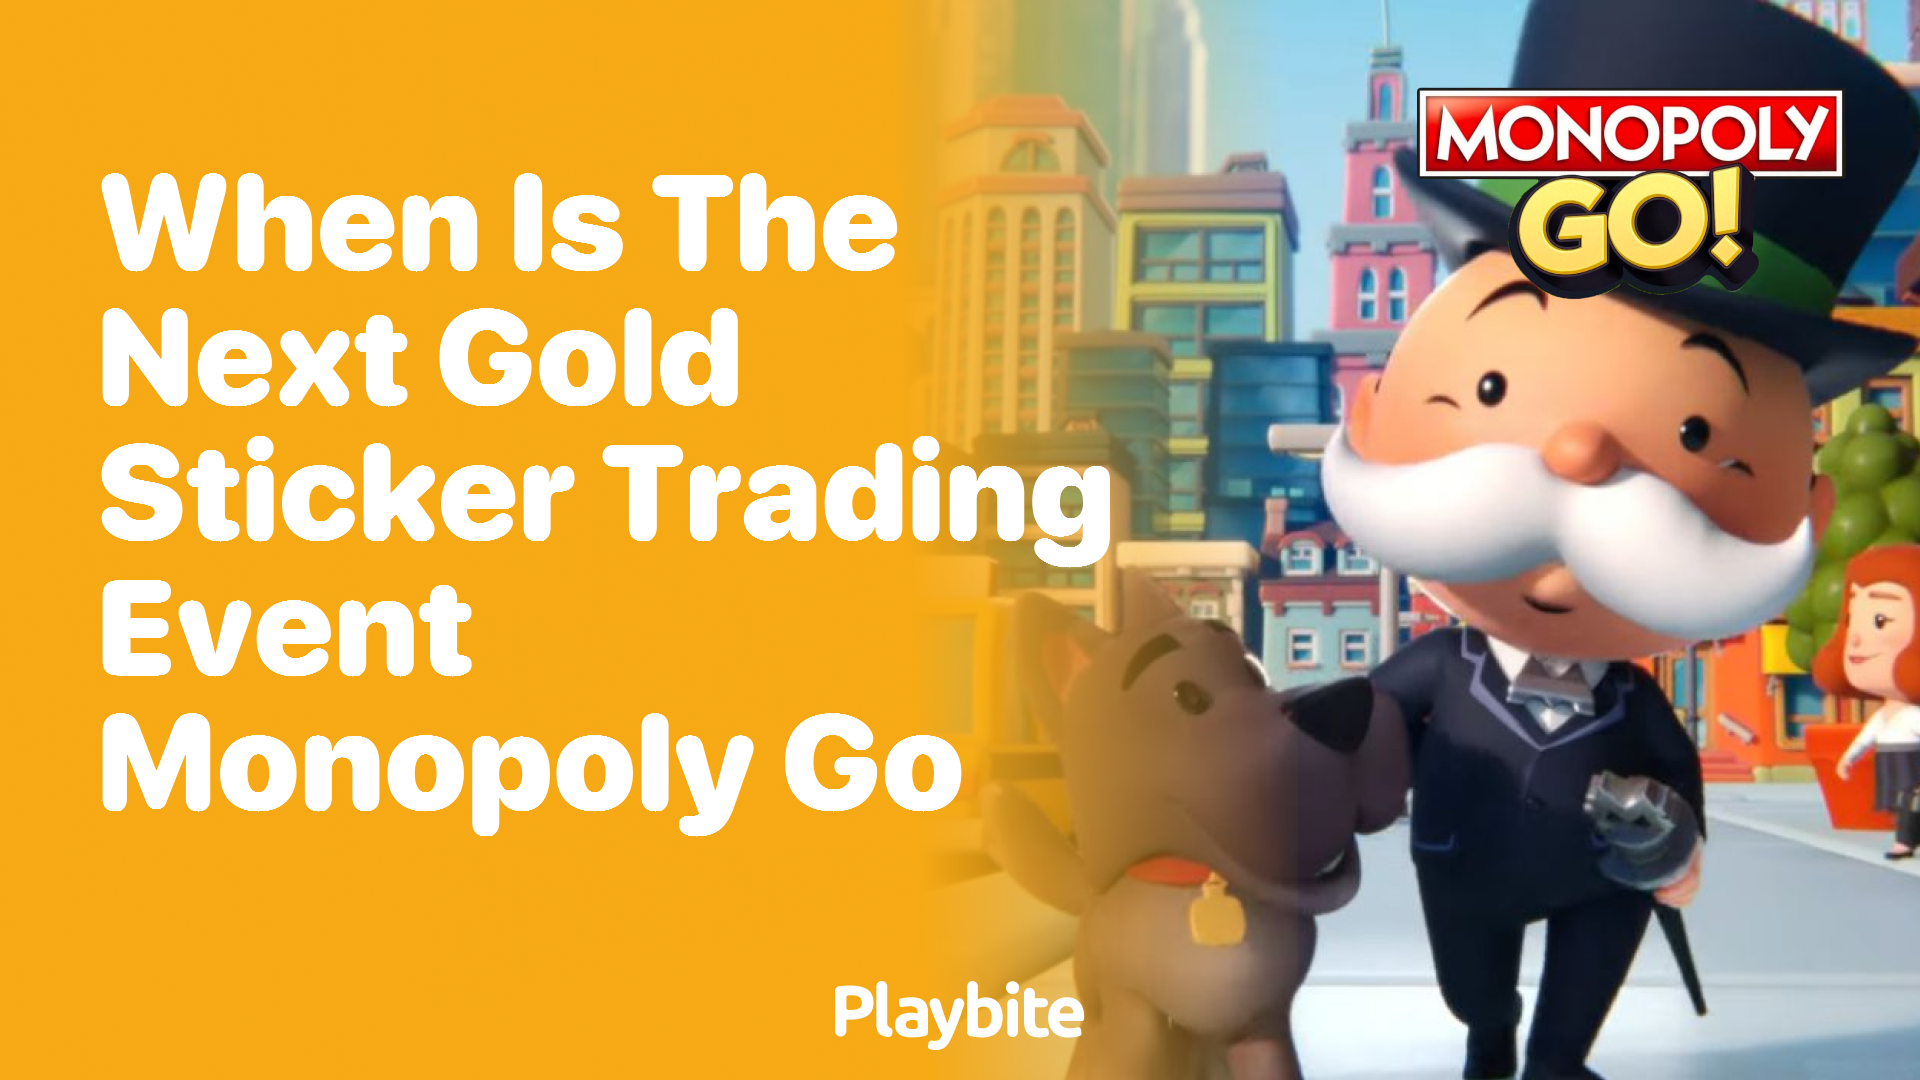 When is the Next Gold Sticker Trading Event in Monopoly Go?